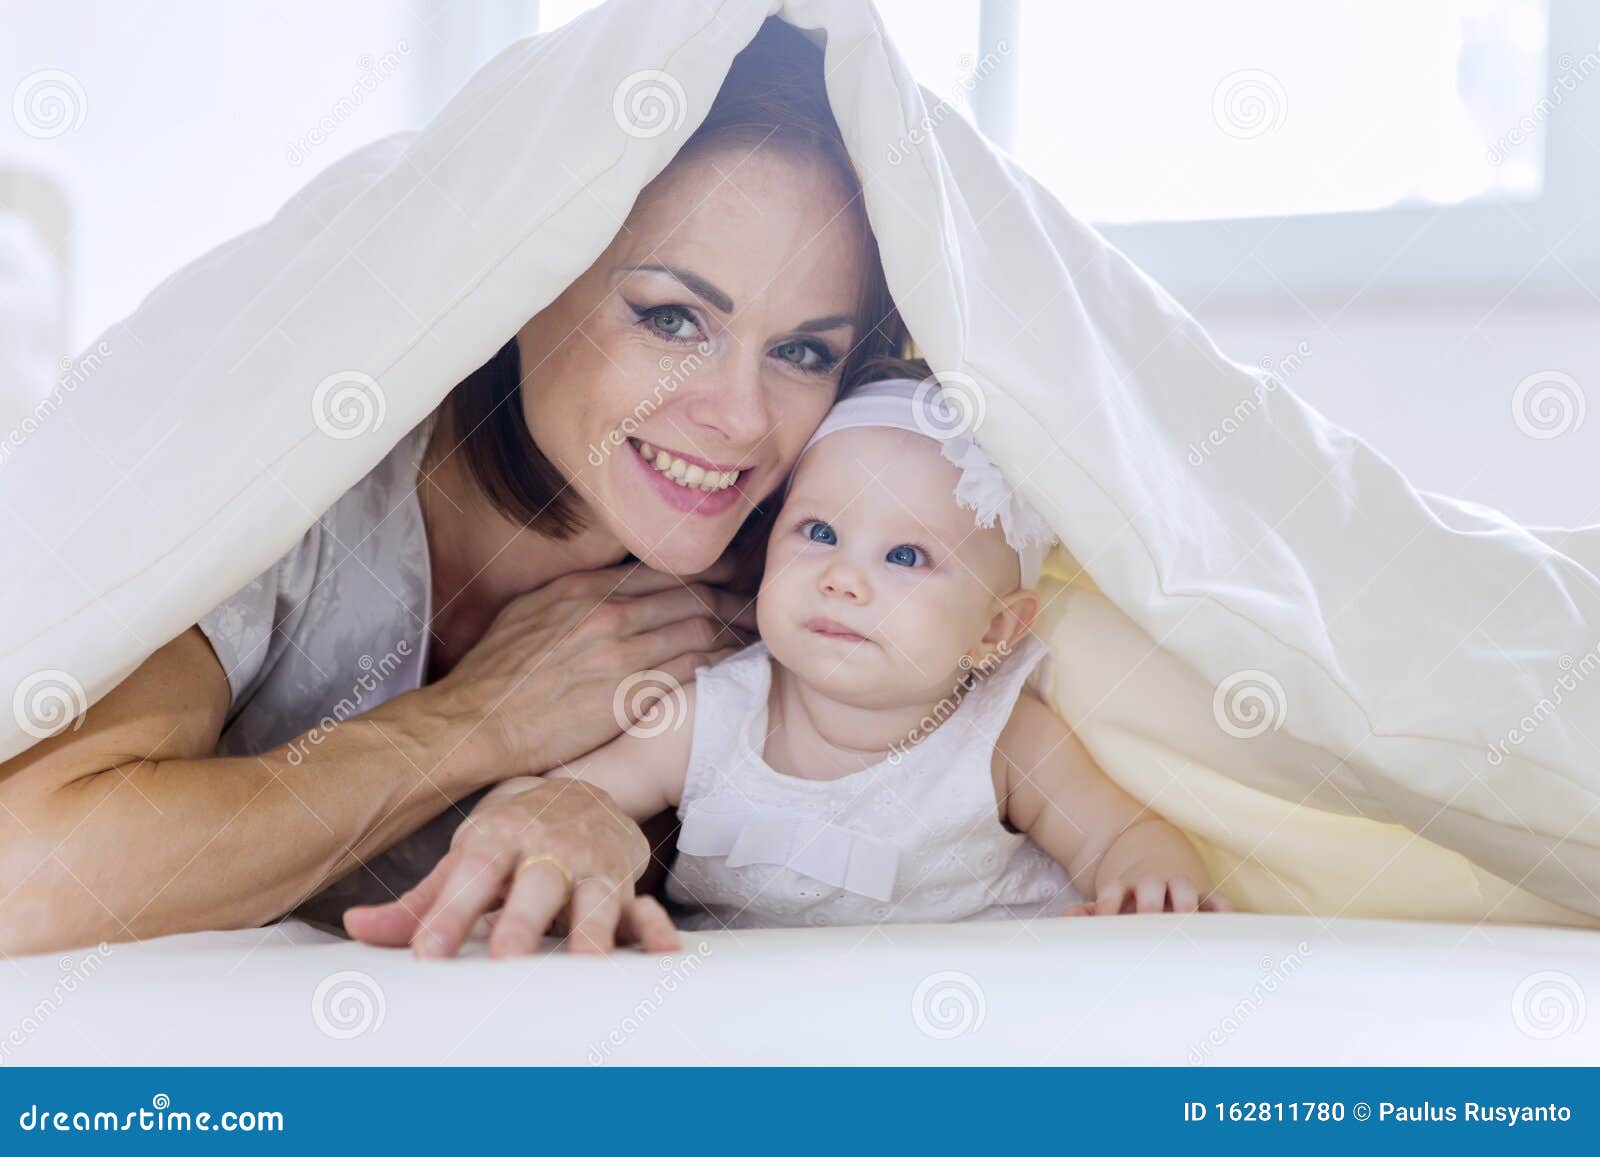 Young Mother Plays with Her Baby Under a Blanket Stock Photo - Image of ...